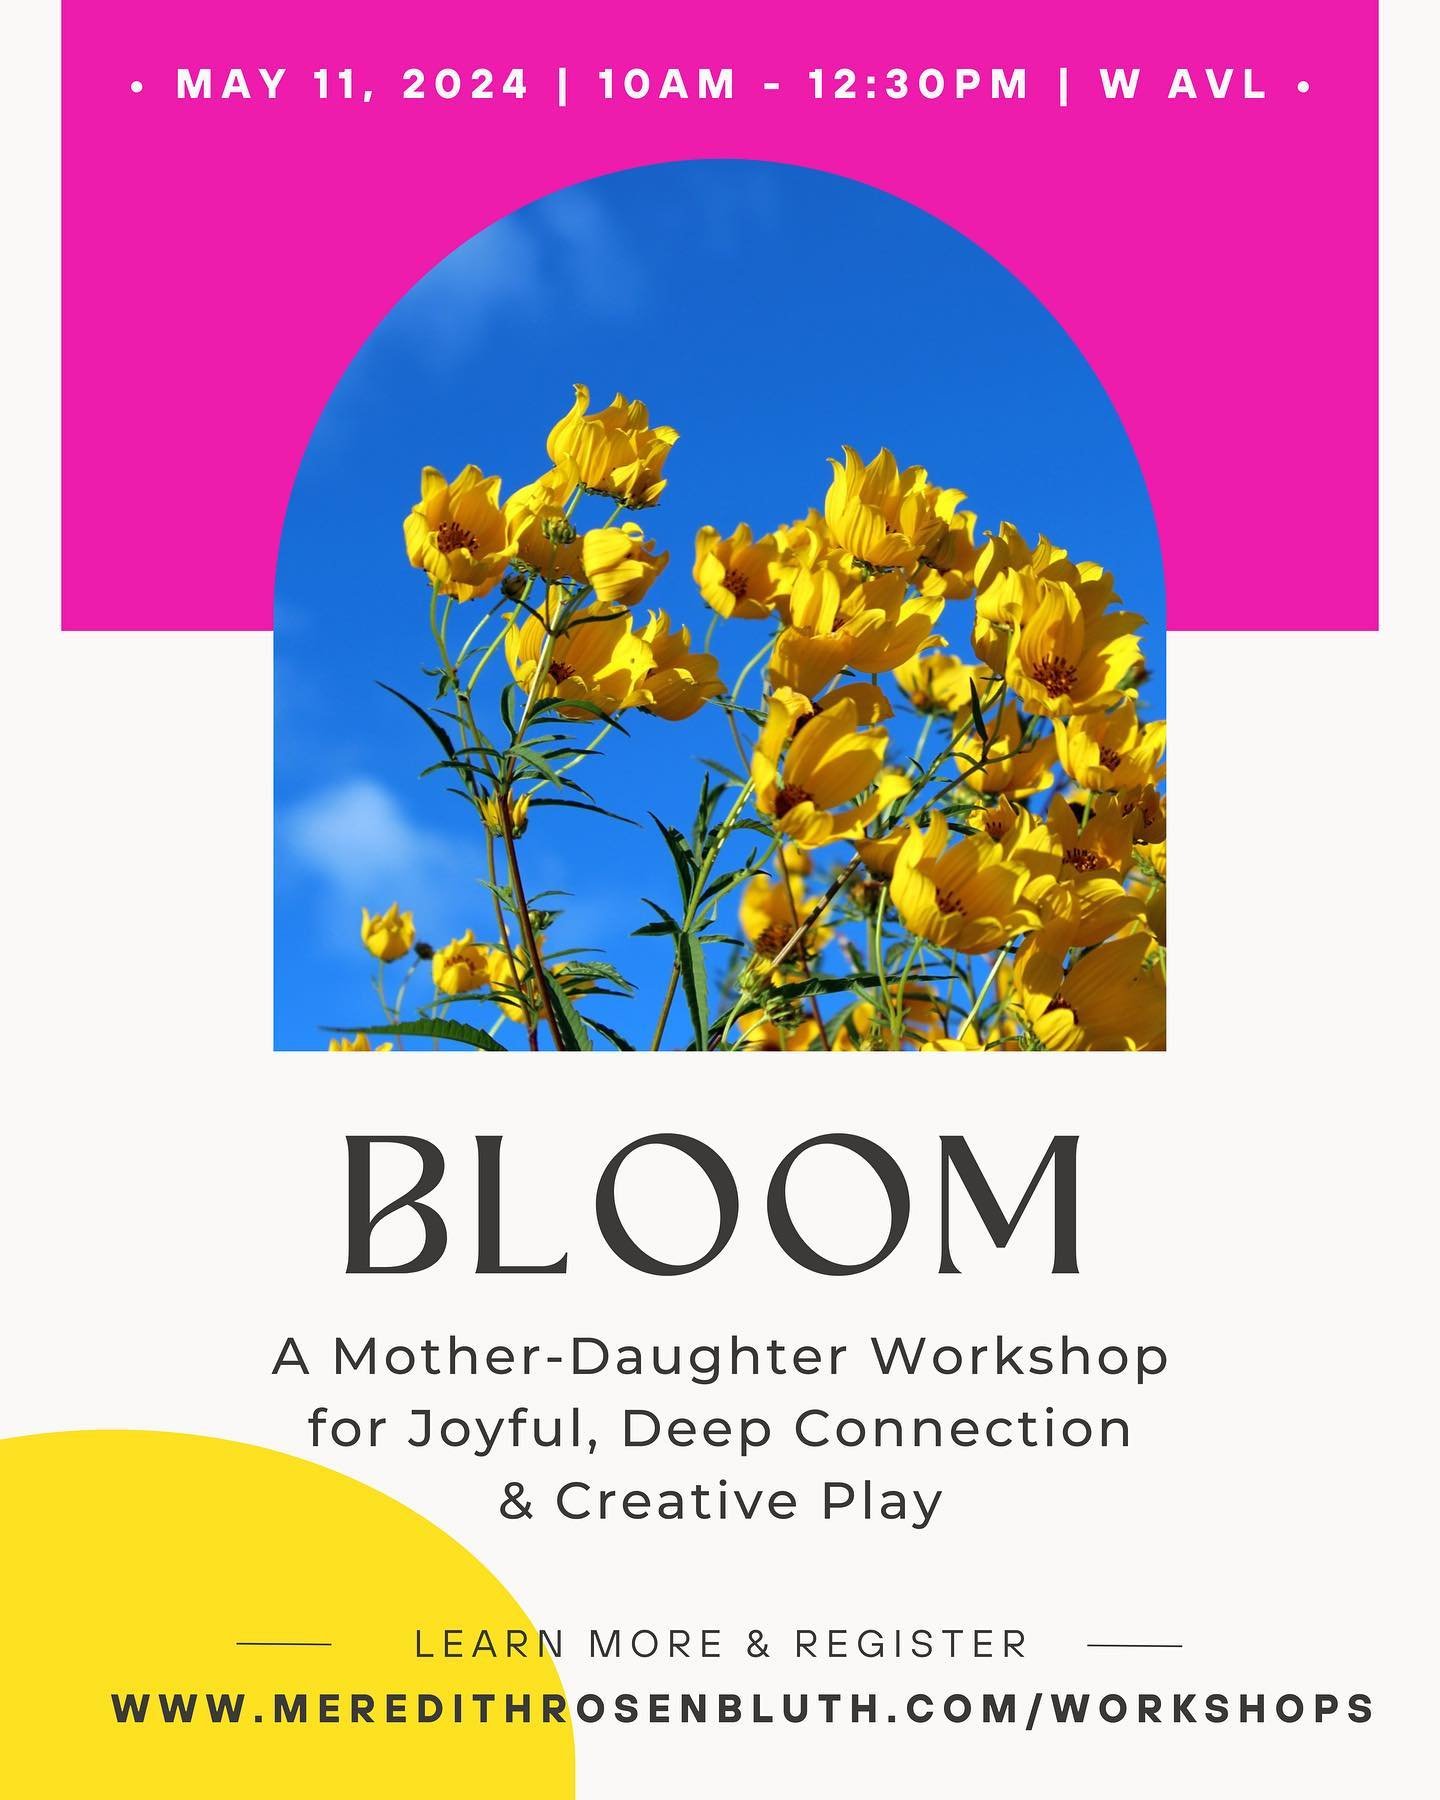 Mark your calendars! BLOOM: A Mother-Daughter Workshop for Joyful, Deep Connection &amp; Creative Play is happening on May 11 in West Asheville ~ a perfect way to celebrate Mother&rsquo;s Day 💐.

In this connective, experiential workshop, you and yo